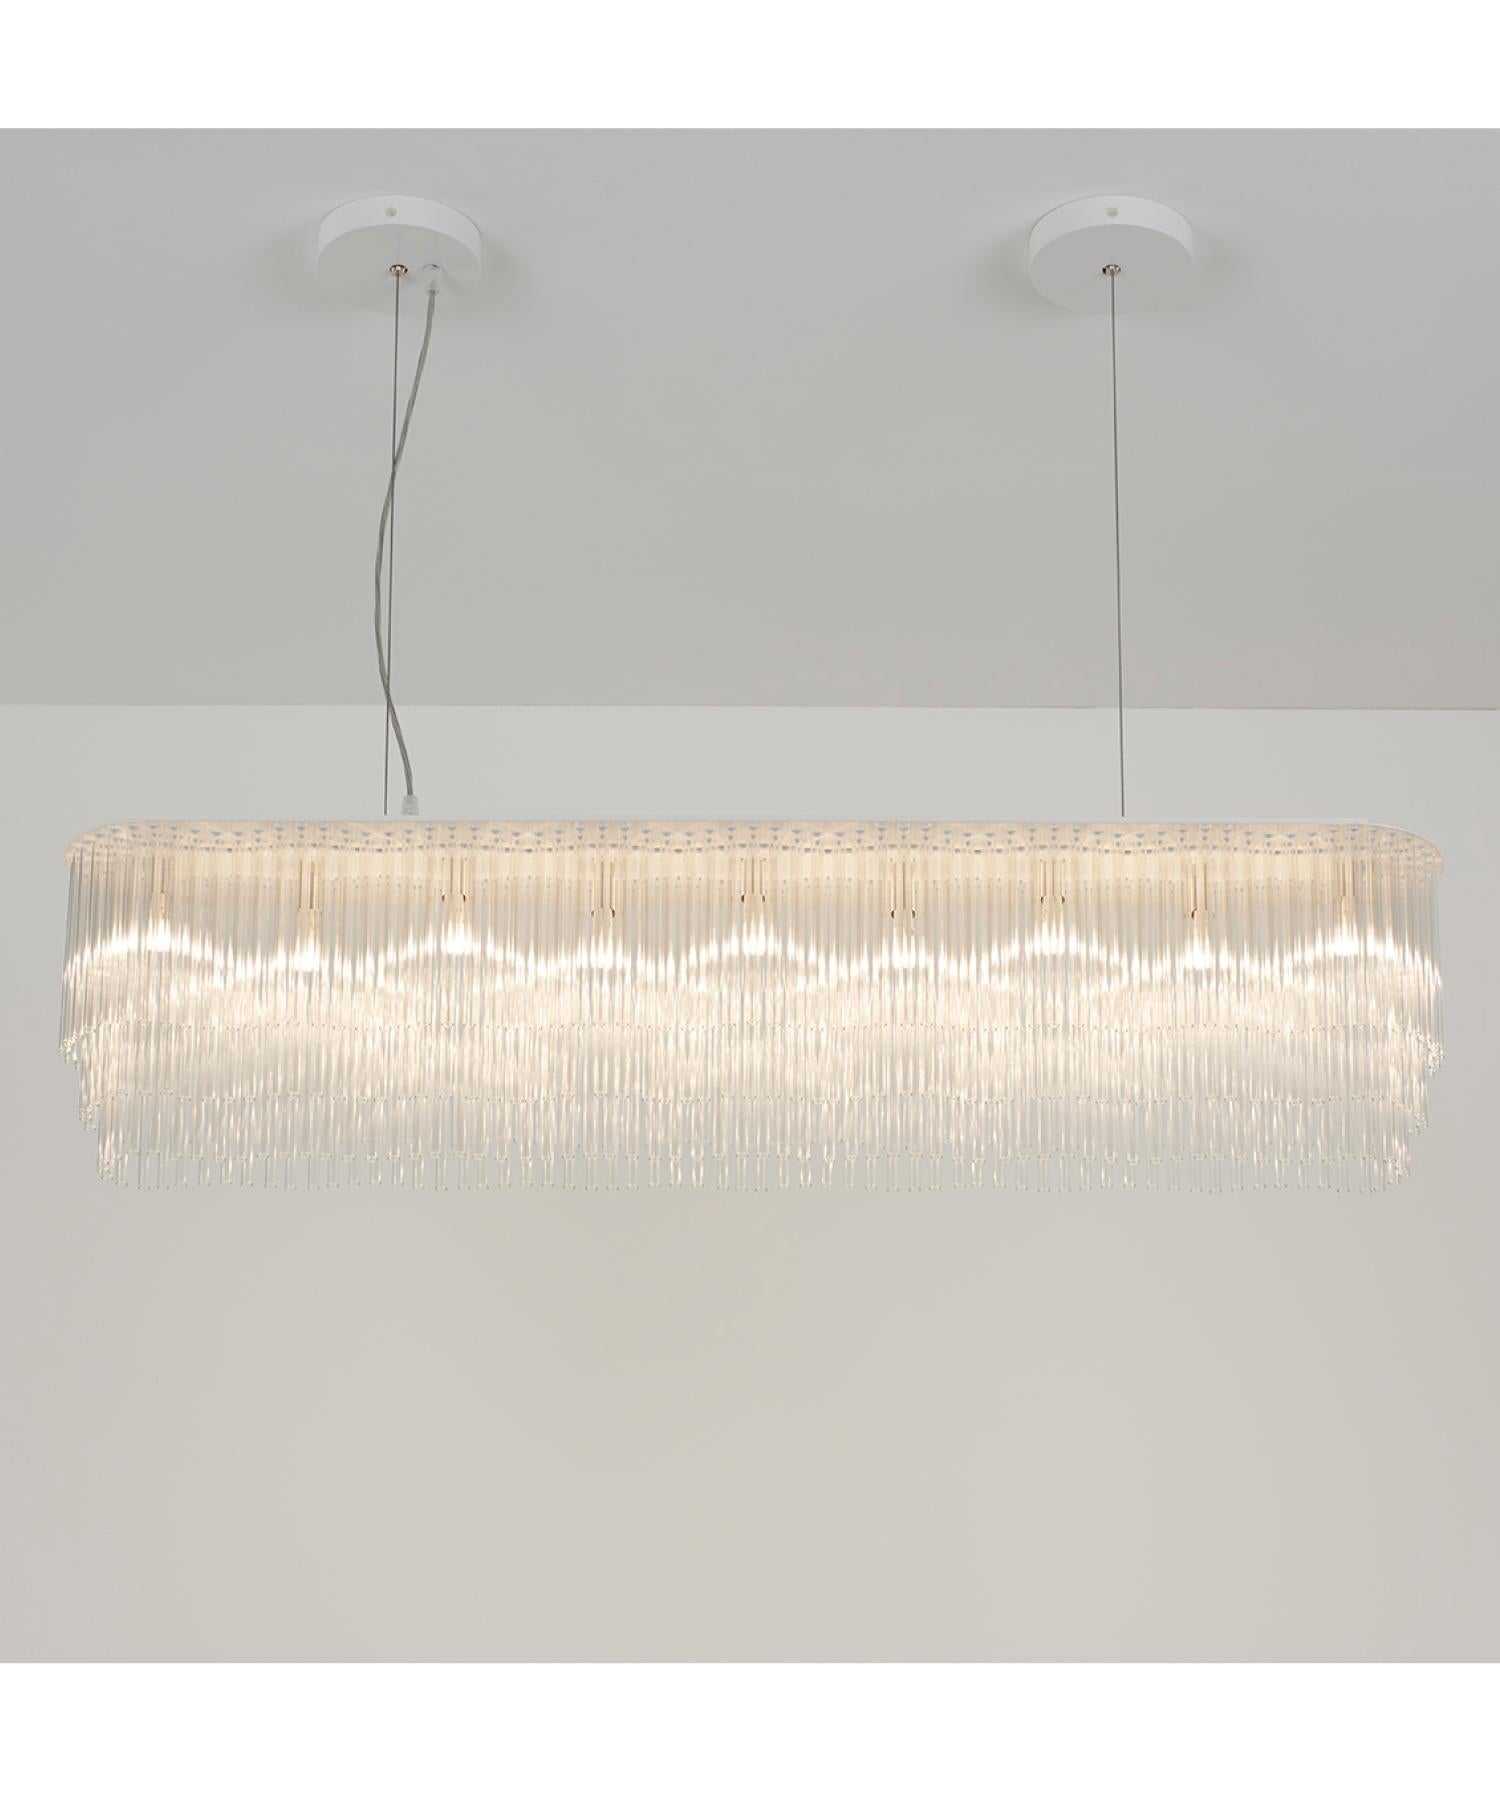 For interiors that require a more minimal luminaire, the Linear Chandelier Thin is a great lightweight alternative to the Linear Chandelier. It works equally well suspended in open-plan spaces or as a central feature over dining tables and work